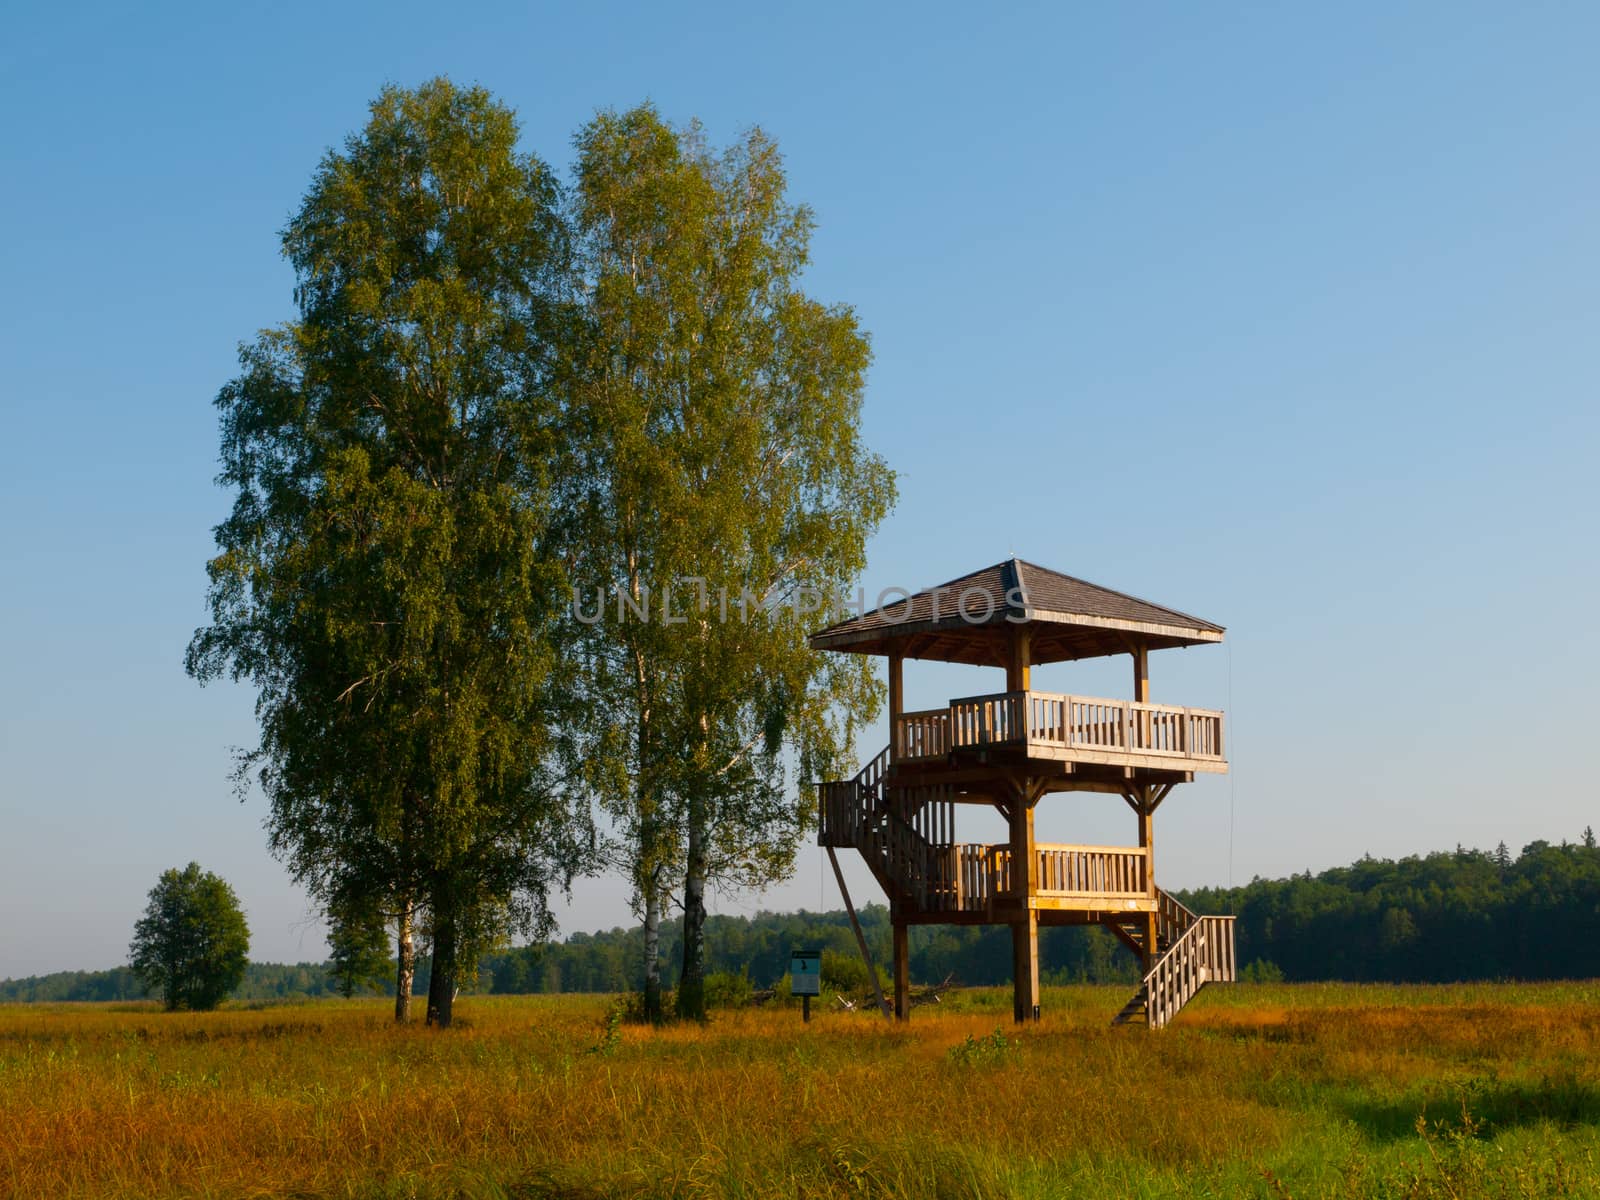 Wooden lookout tower near Bialowieza primeval forest (Poland)